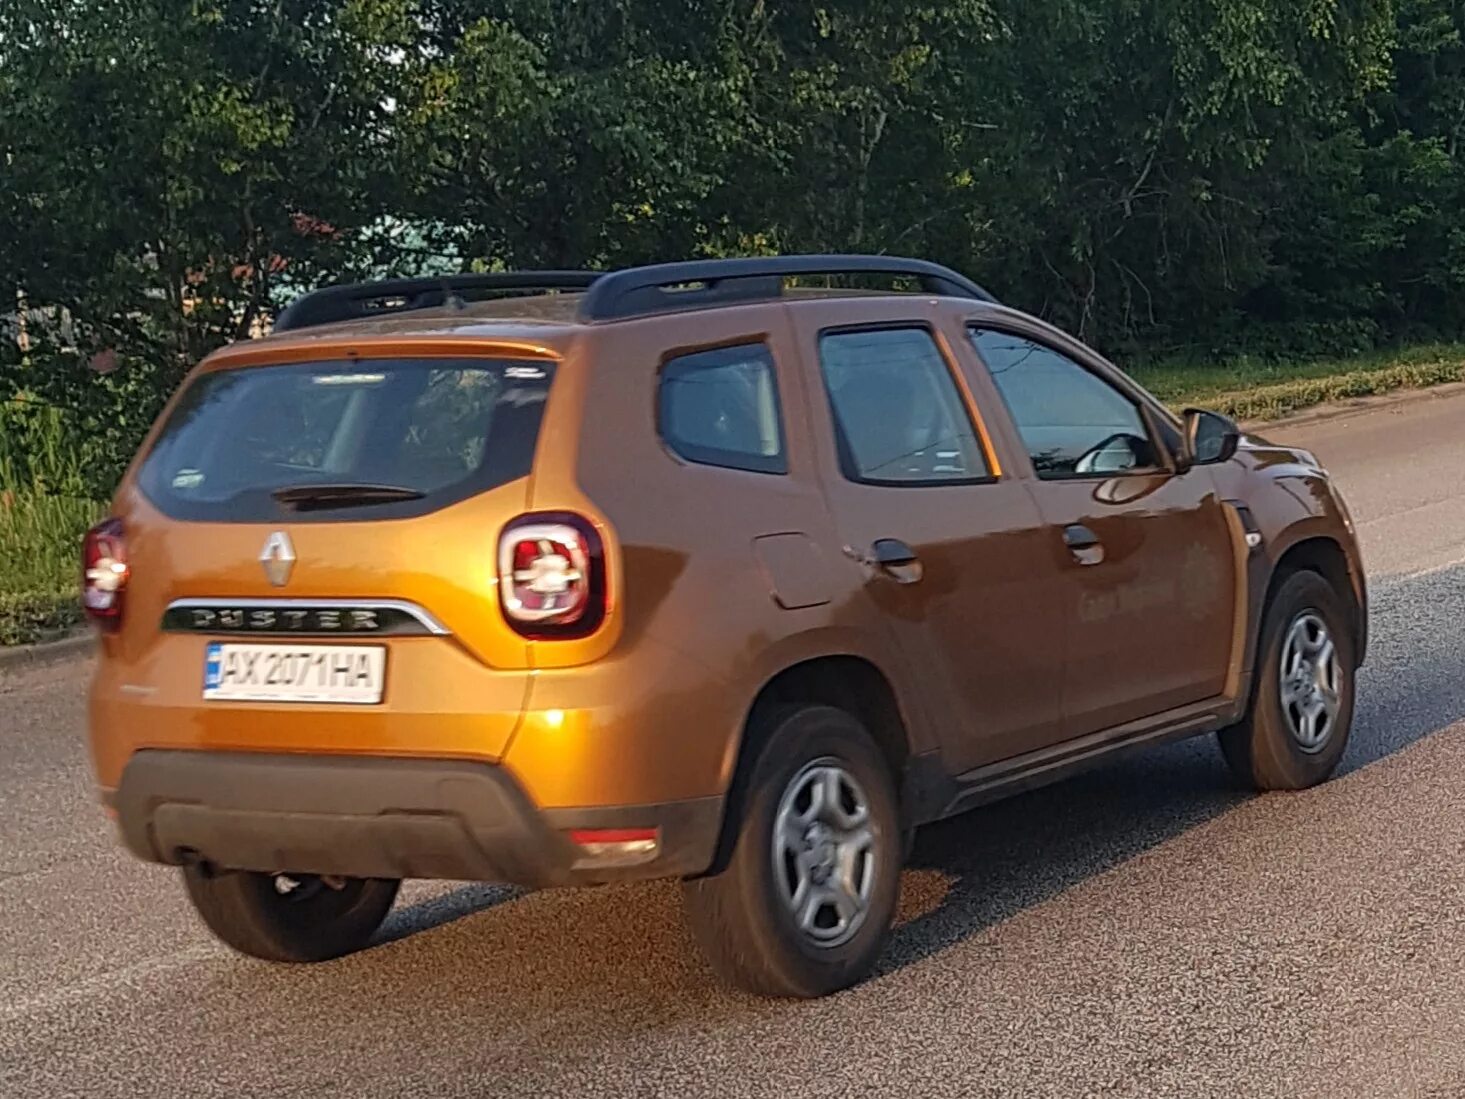 Renault duster года выпуска. Renault Duster (2g). Дастер 2022. Рено Дастер 2022. Цвета Рено Дастер 2022.